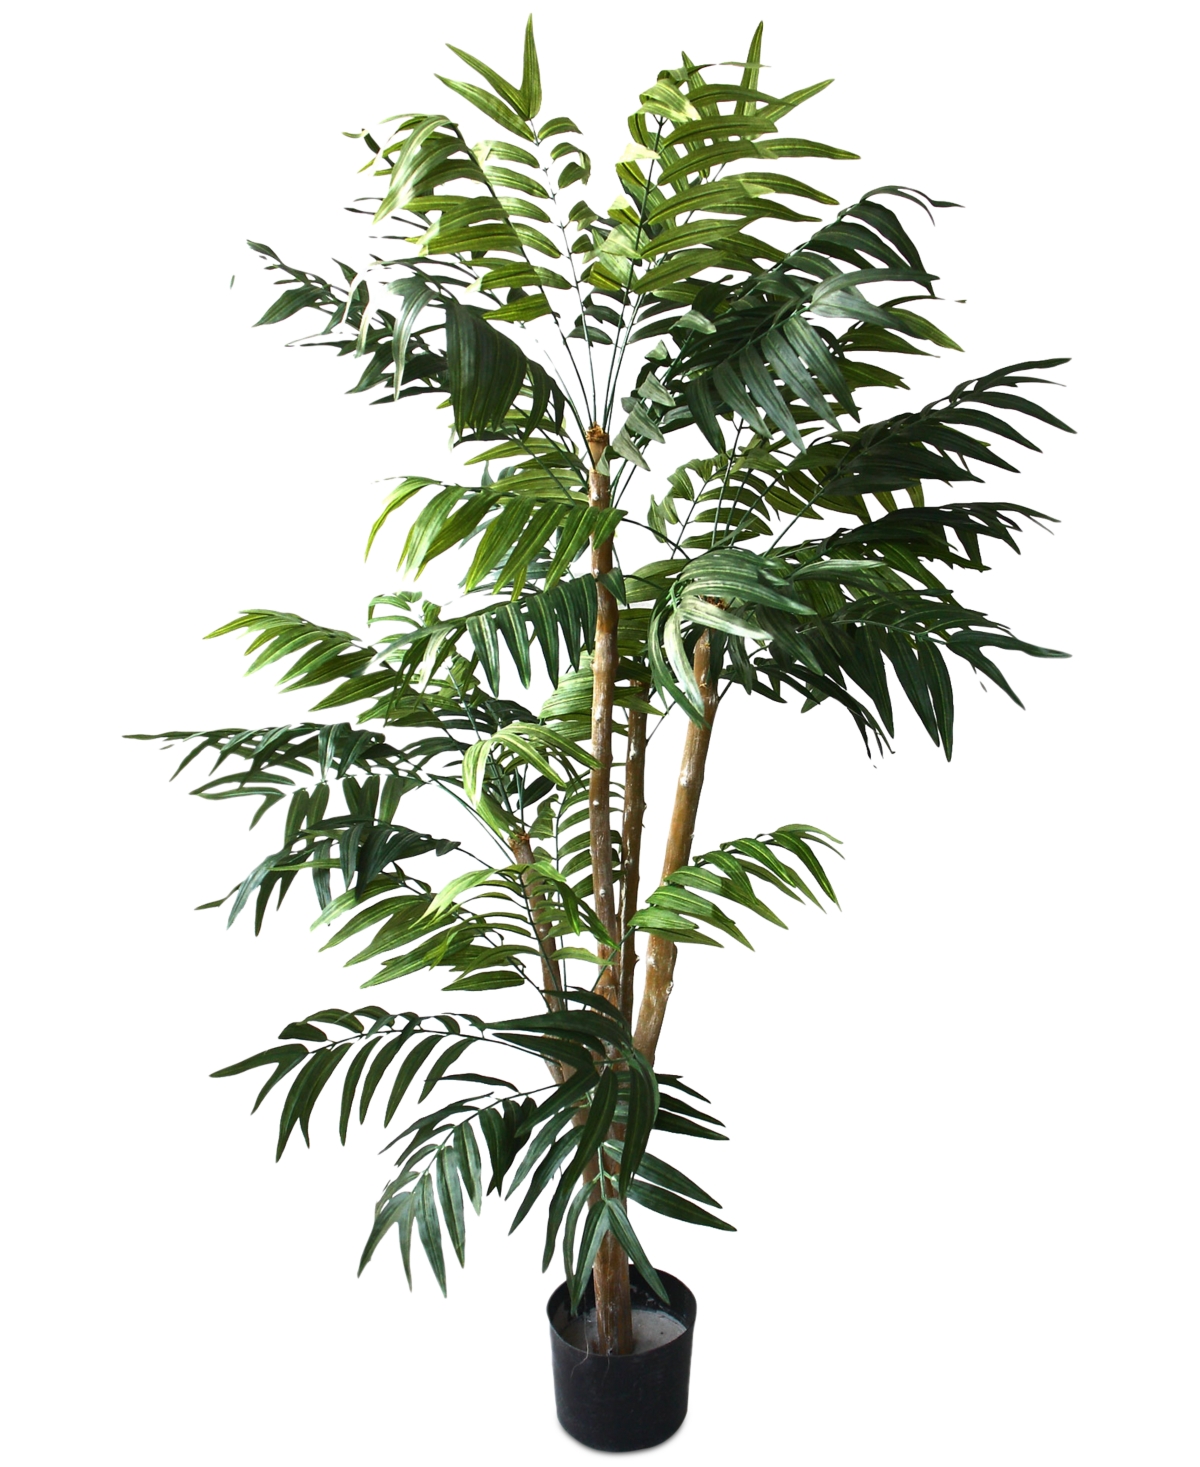 Tropical Palm 5 Ft. Artificial Tree by Pure Garden, 30" L x 30" W x 60" H - Green